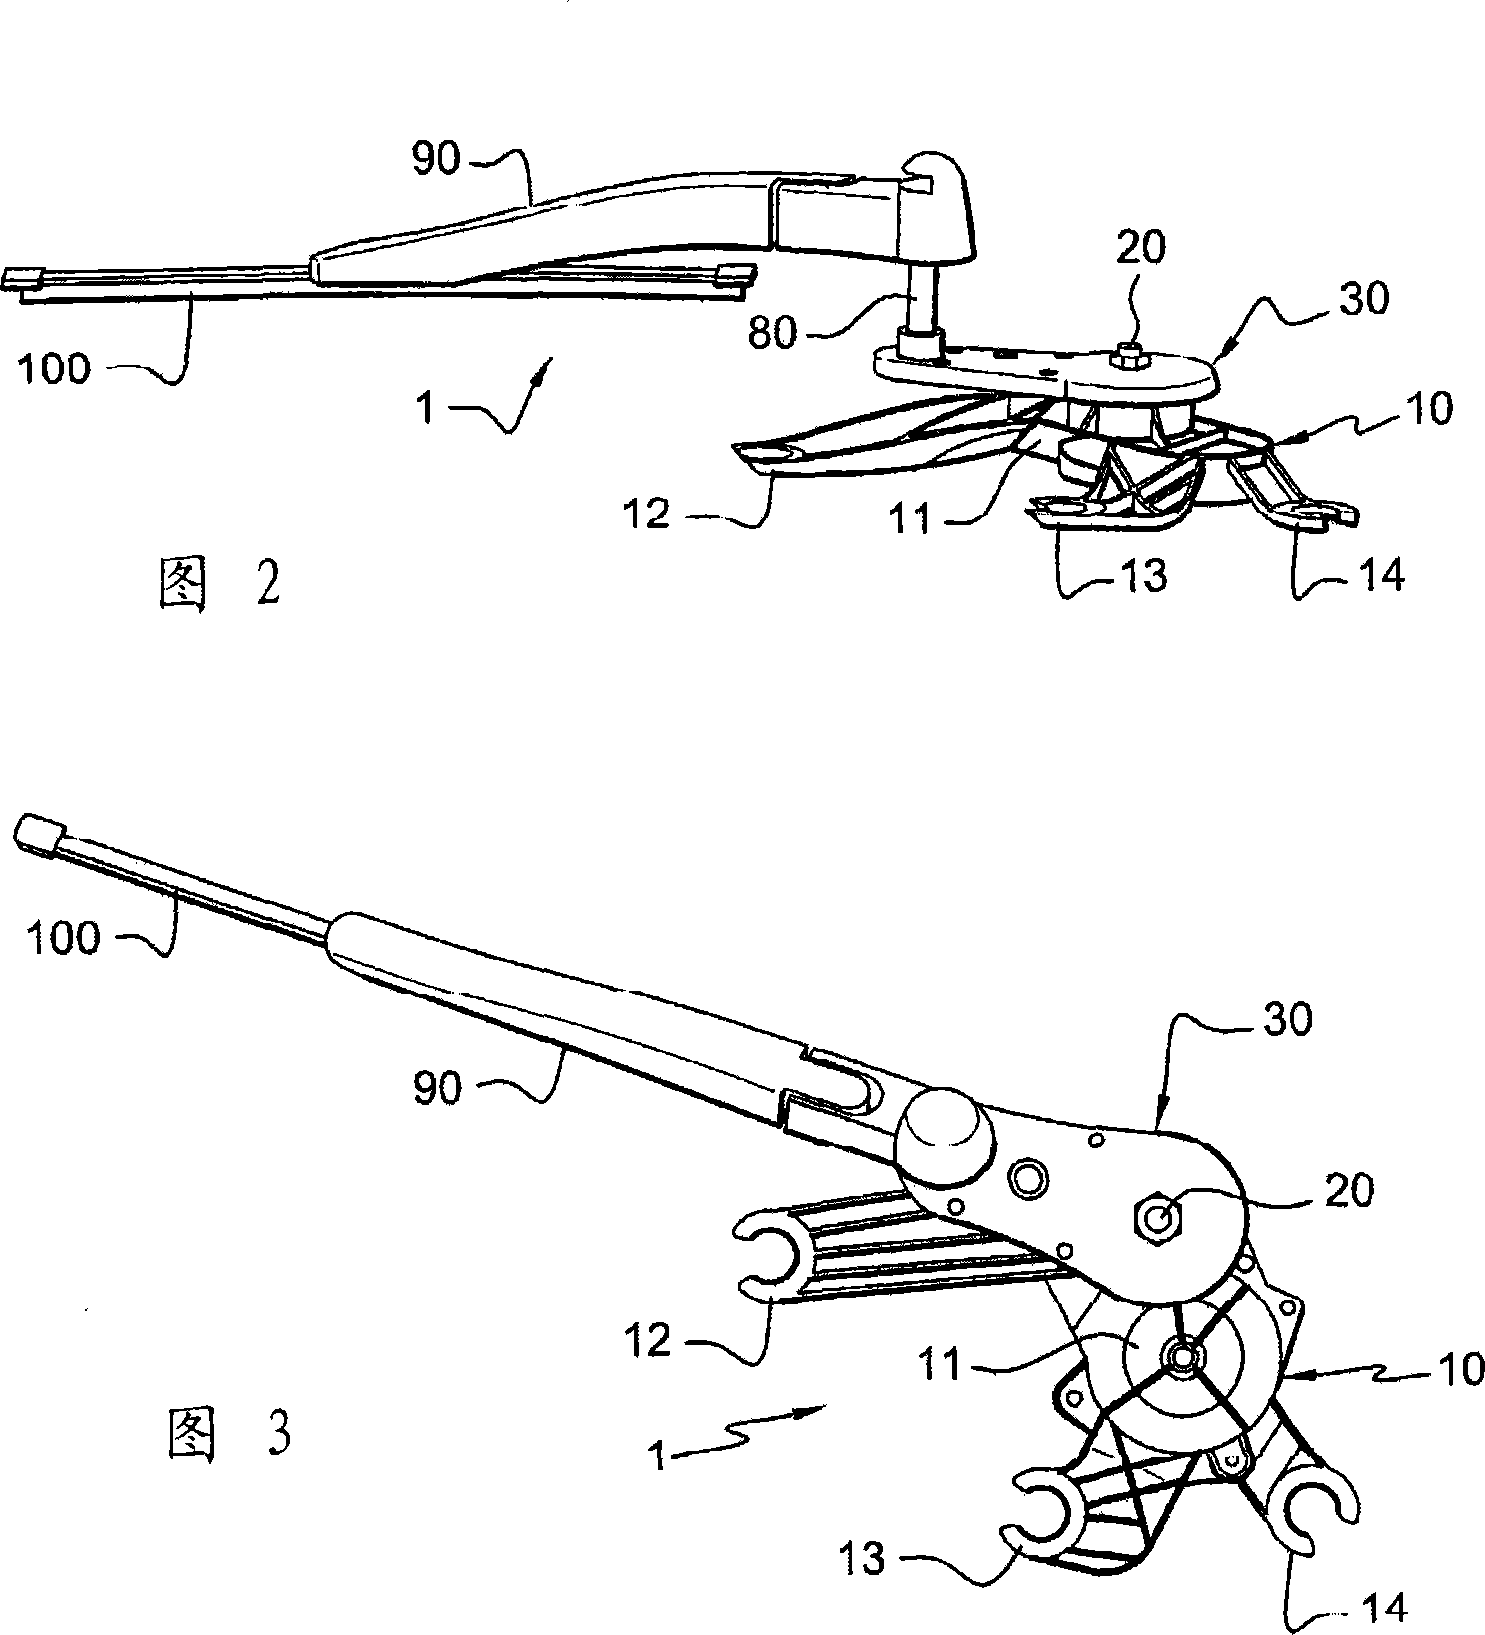 Drive mechanism especially for a window wiping device with an elliptical wiping motion